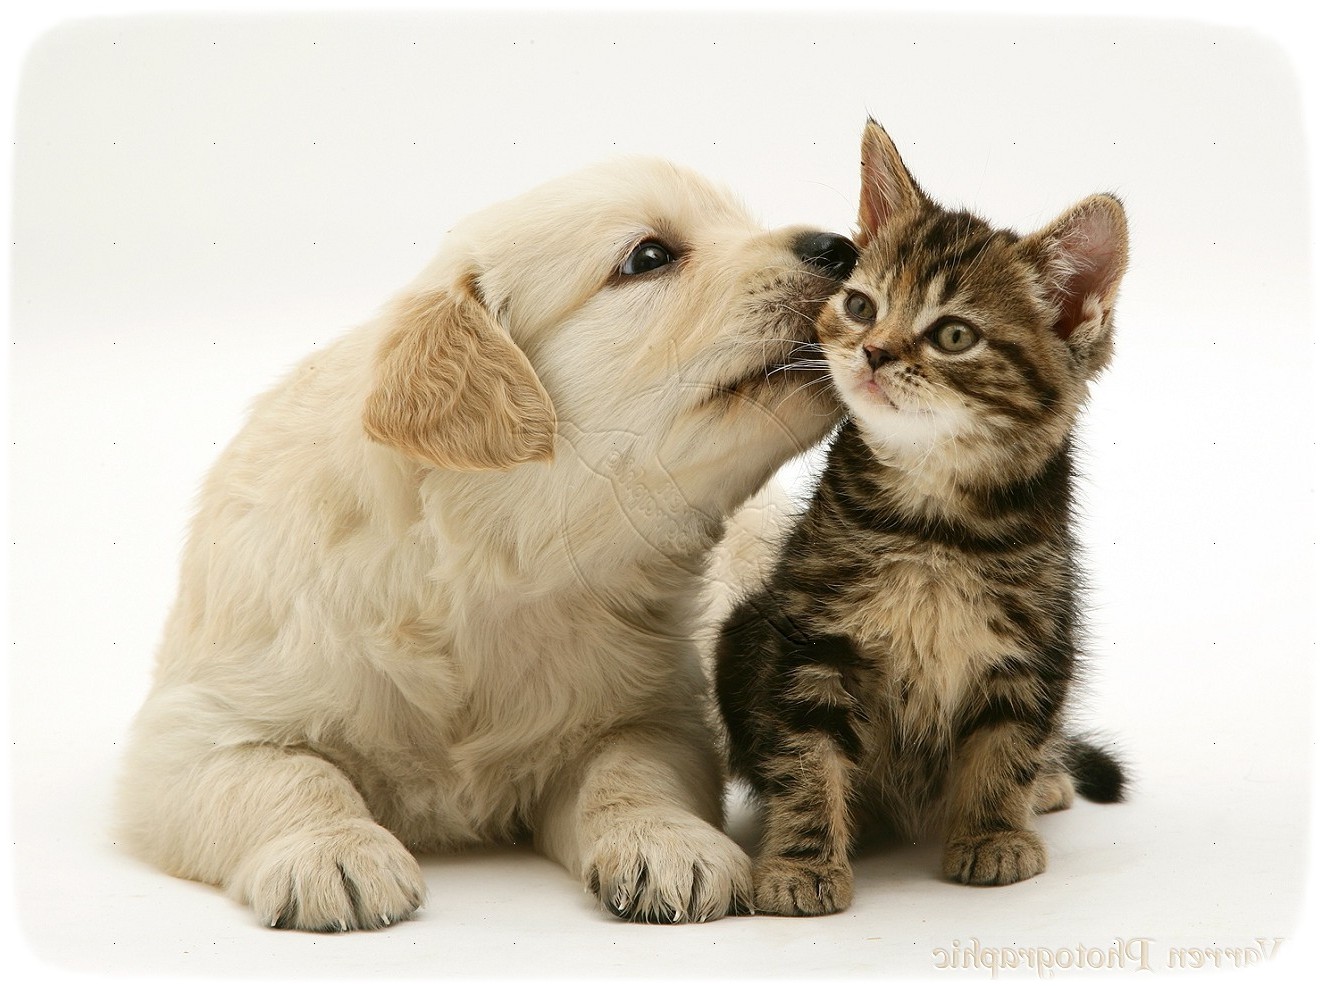 Puppies And Kittens Kissing Wallpaper